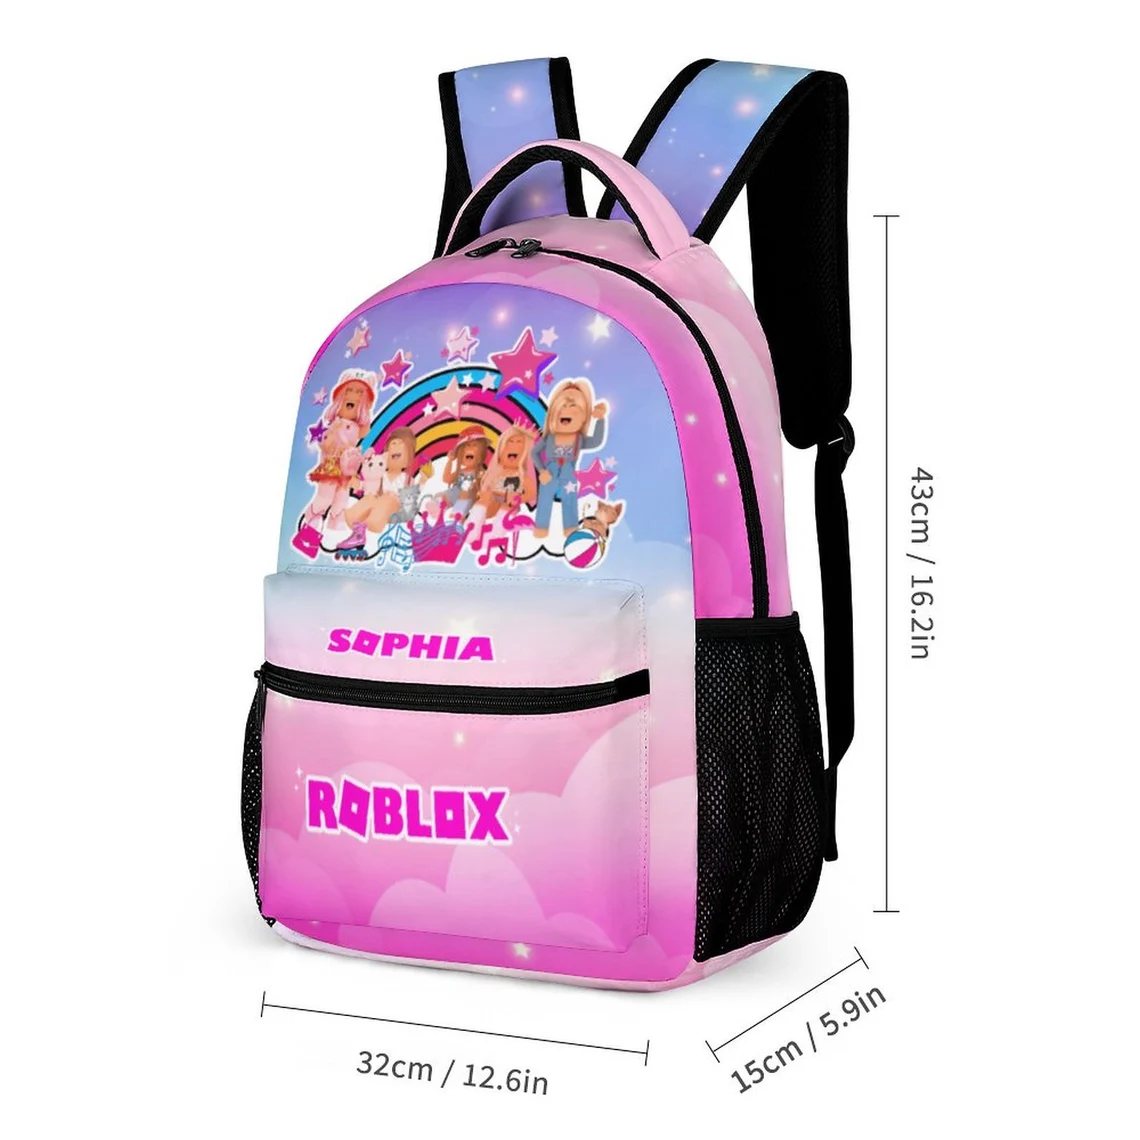 Personalized pink backpack for girls Roblox Girl customizable backpacks Cool Kiddo 14